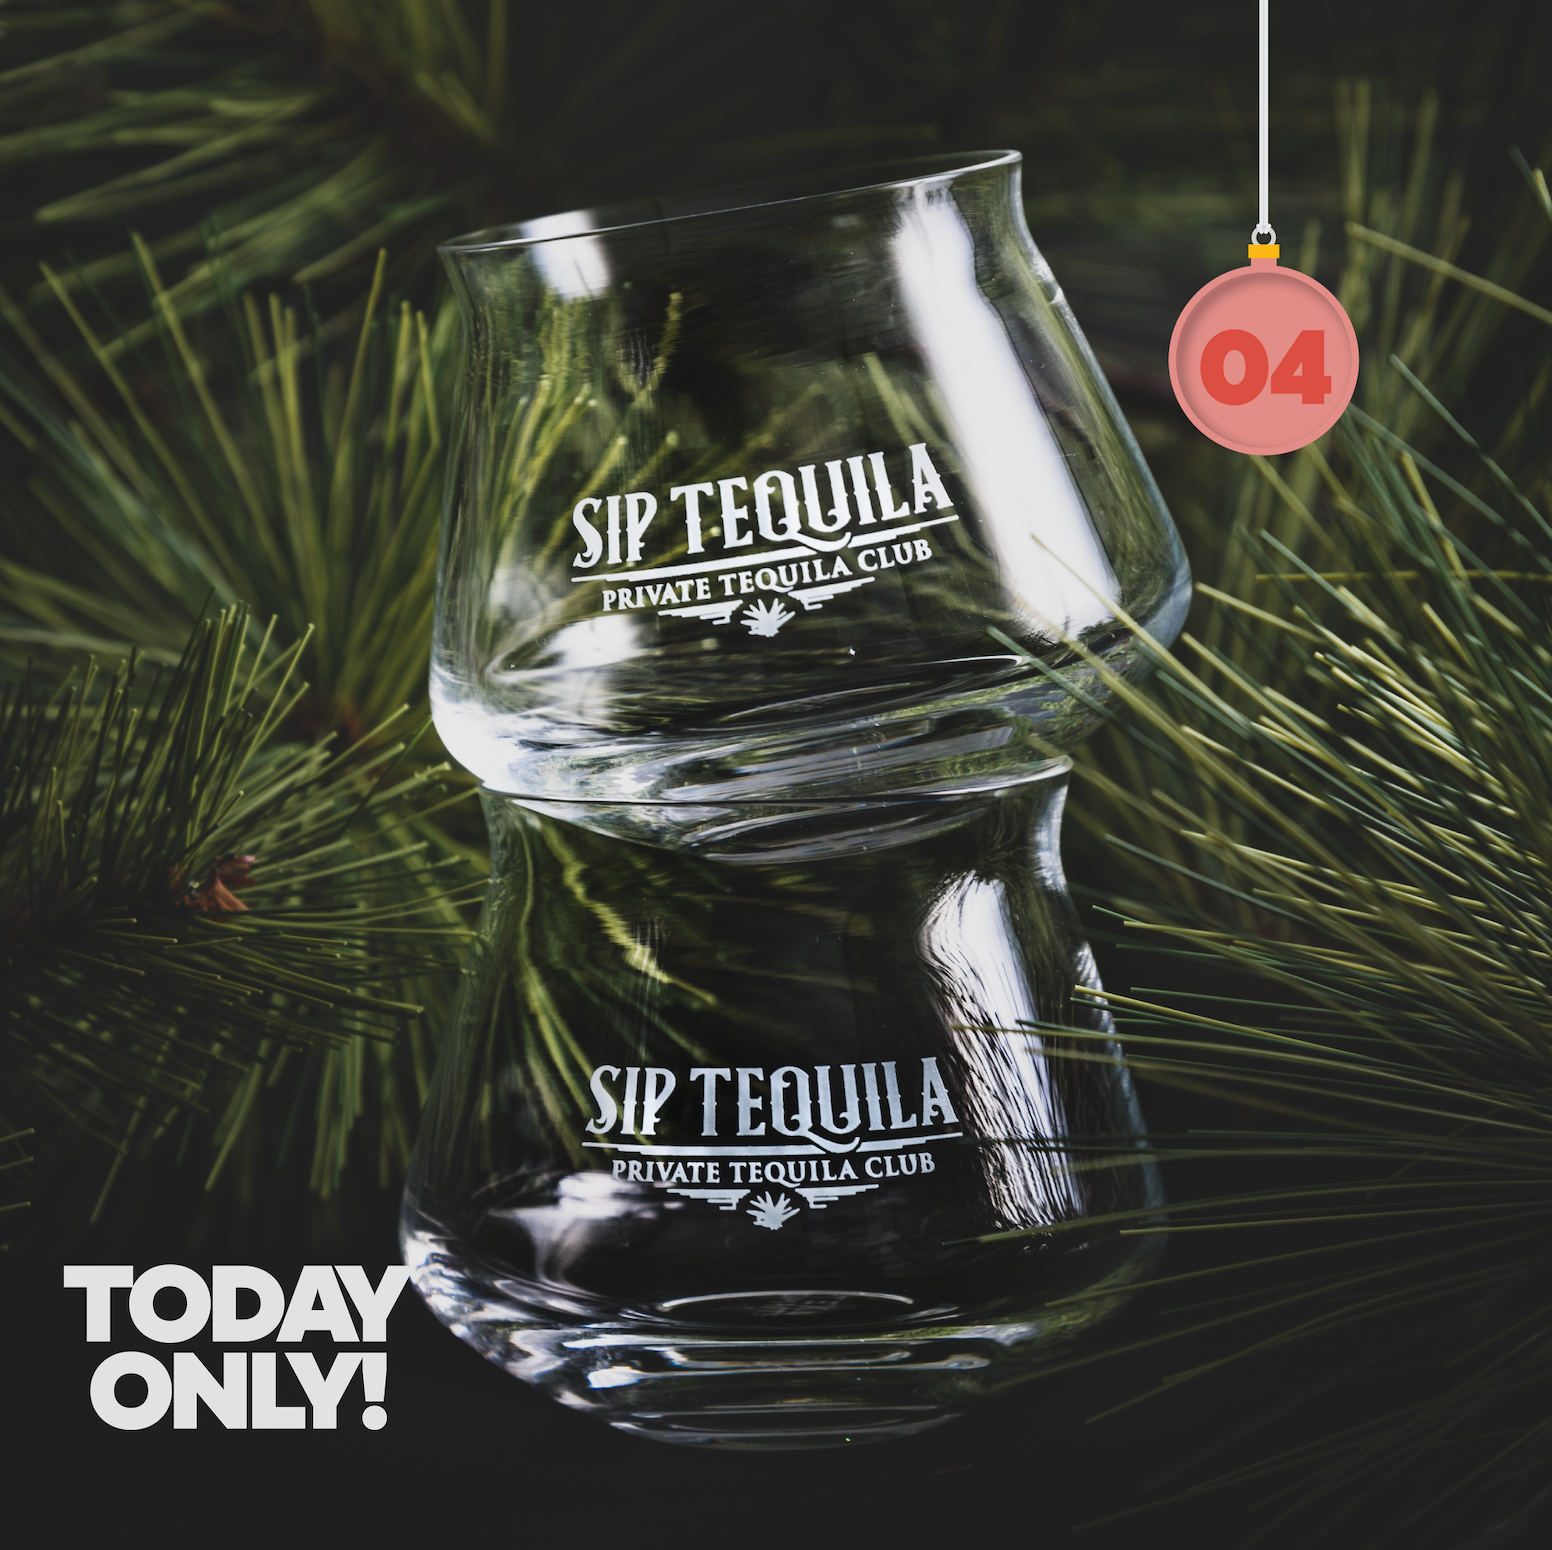 EXPIRED: Spend $150 and get a set of Sip Tequila tasting glasses FREE!